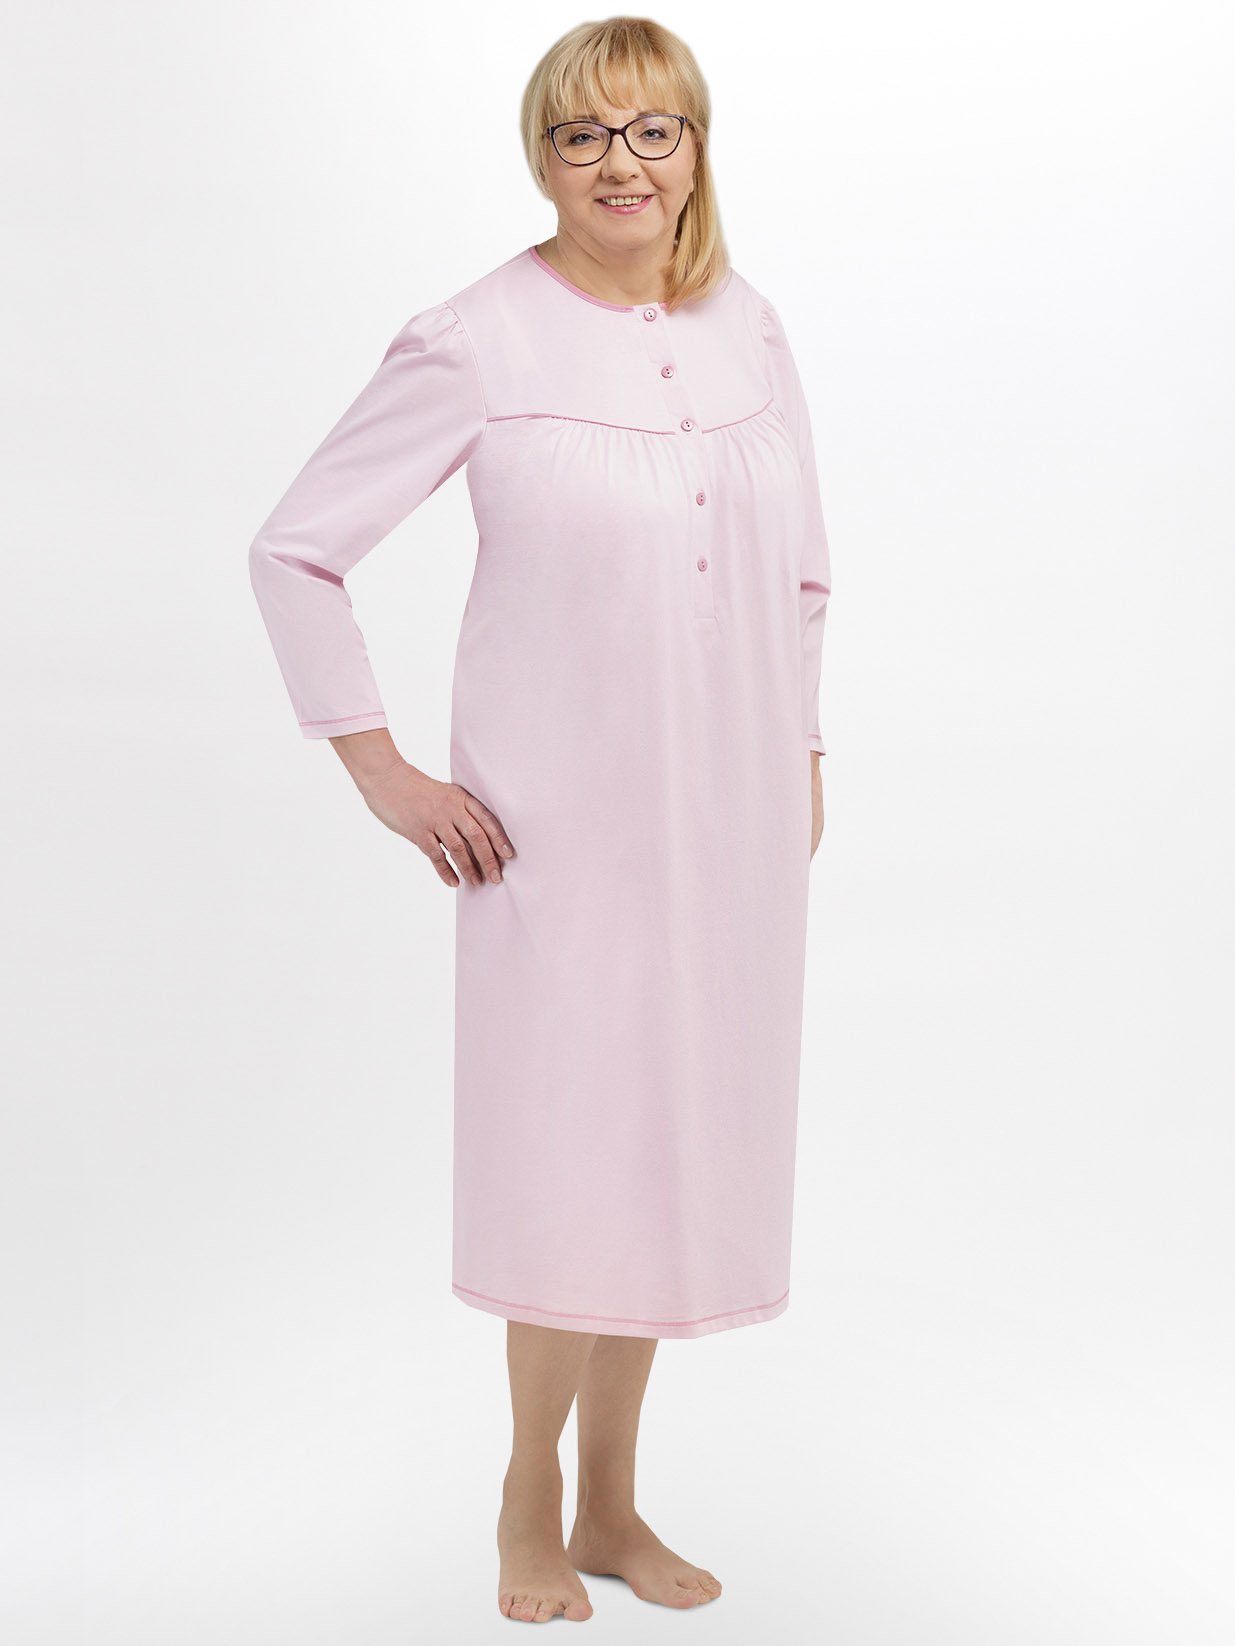 Women's nightgown with buttoned neckline Martel 222 Roza big #2